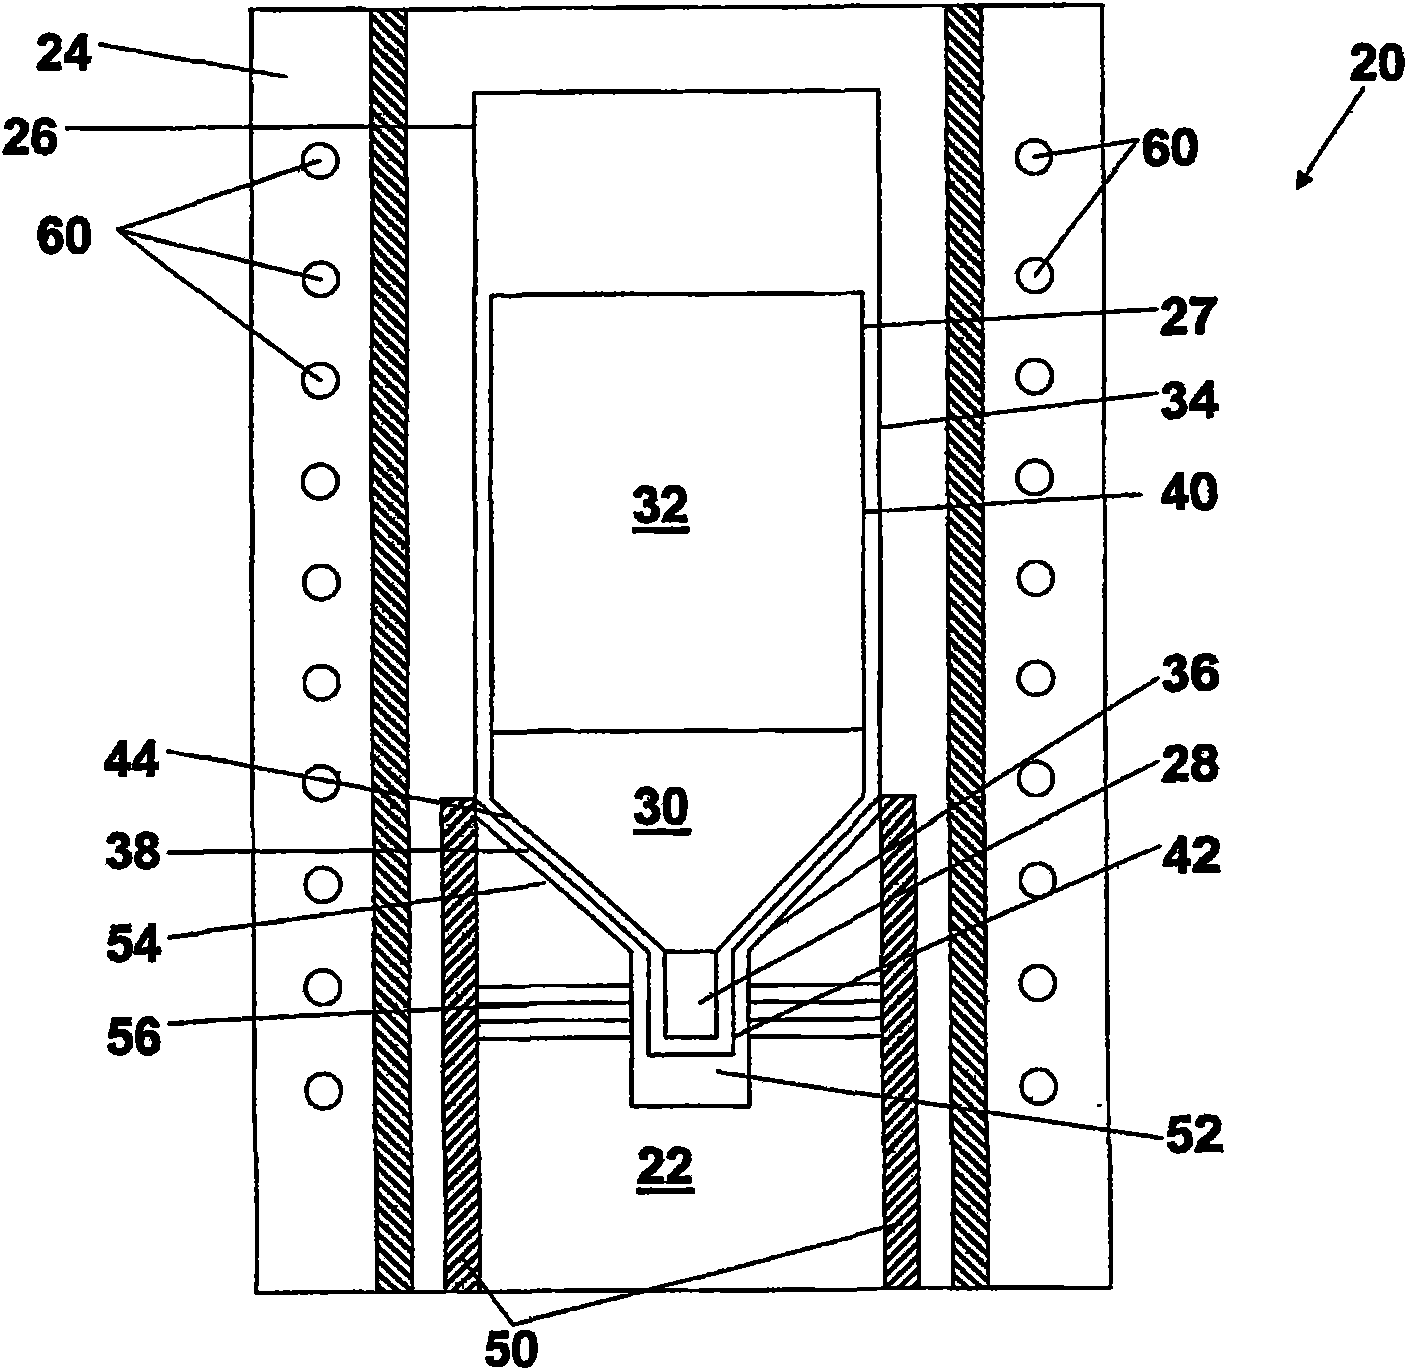 Crystal growing device and method